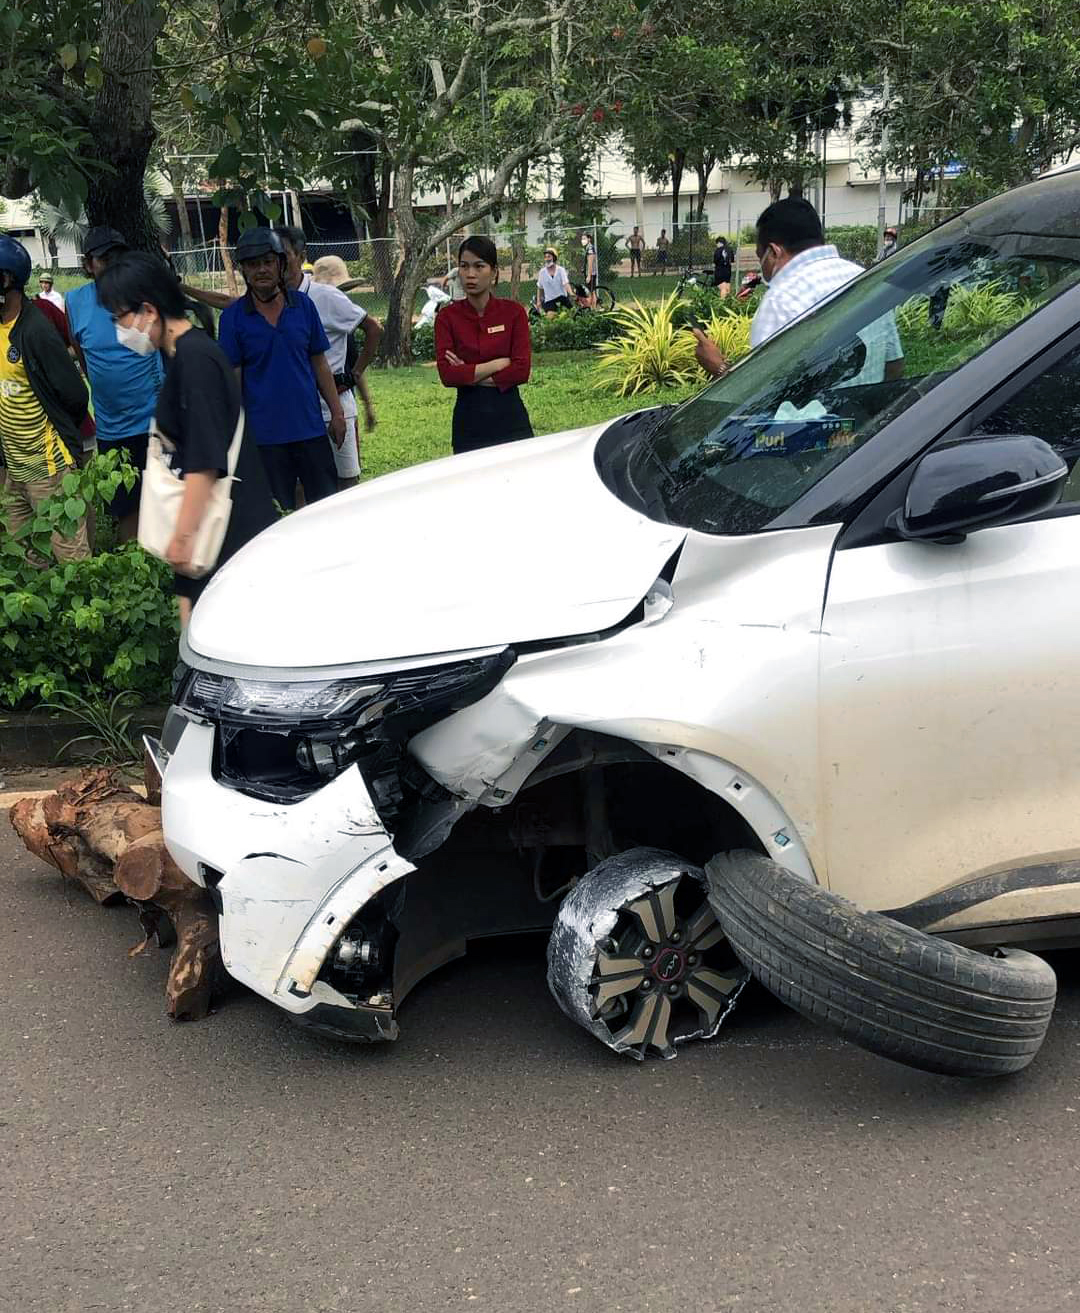 This photo shows a car tire coming off of the wheel in a hit-and-run case in Binh Phuoc Province, Vietnam, July 10, 2022. Photo: B.A. / Tuoi Tre